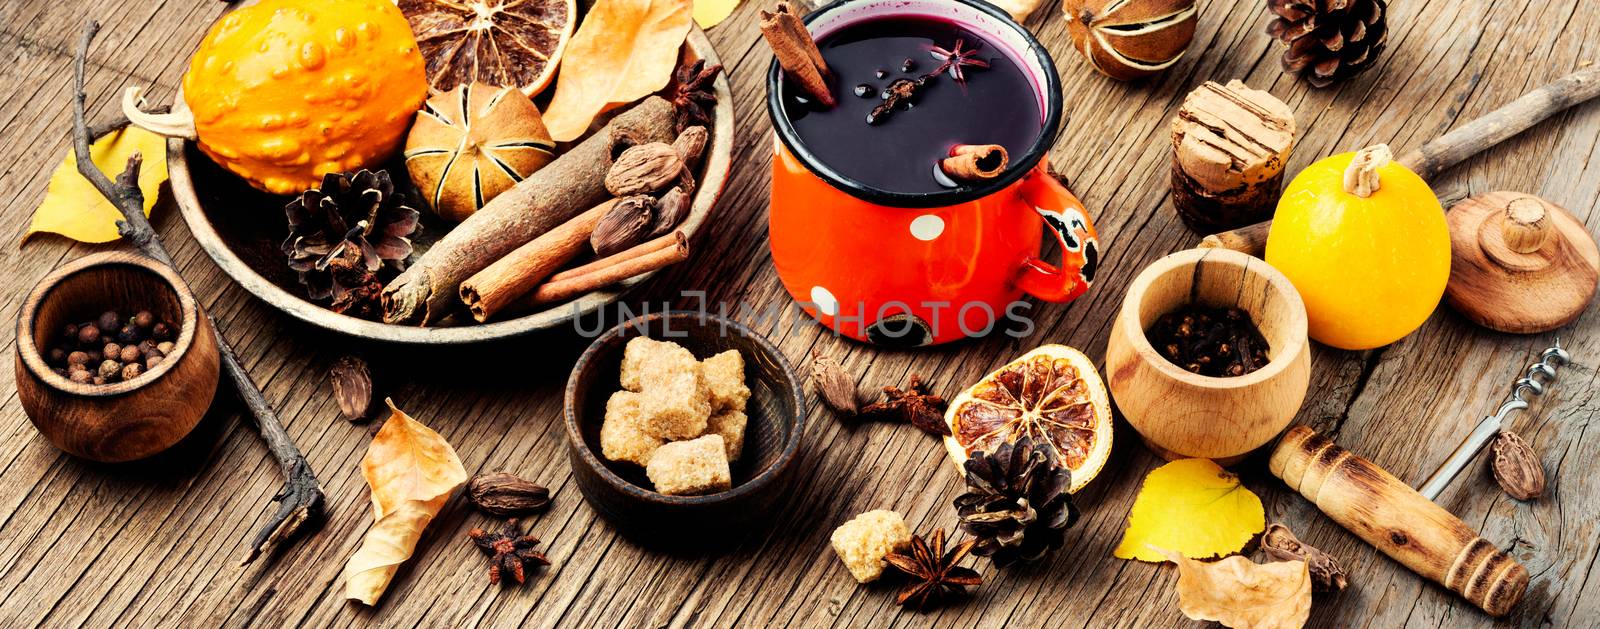 Making mulled wine for winter period.Hot drink with citrus and spices.Autumn still life.Autumn picnic concept